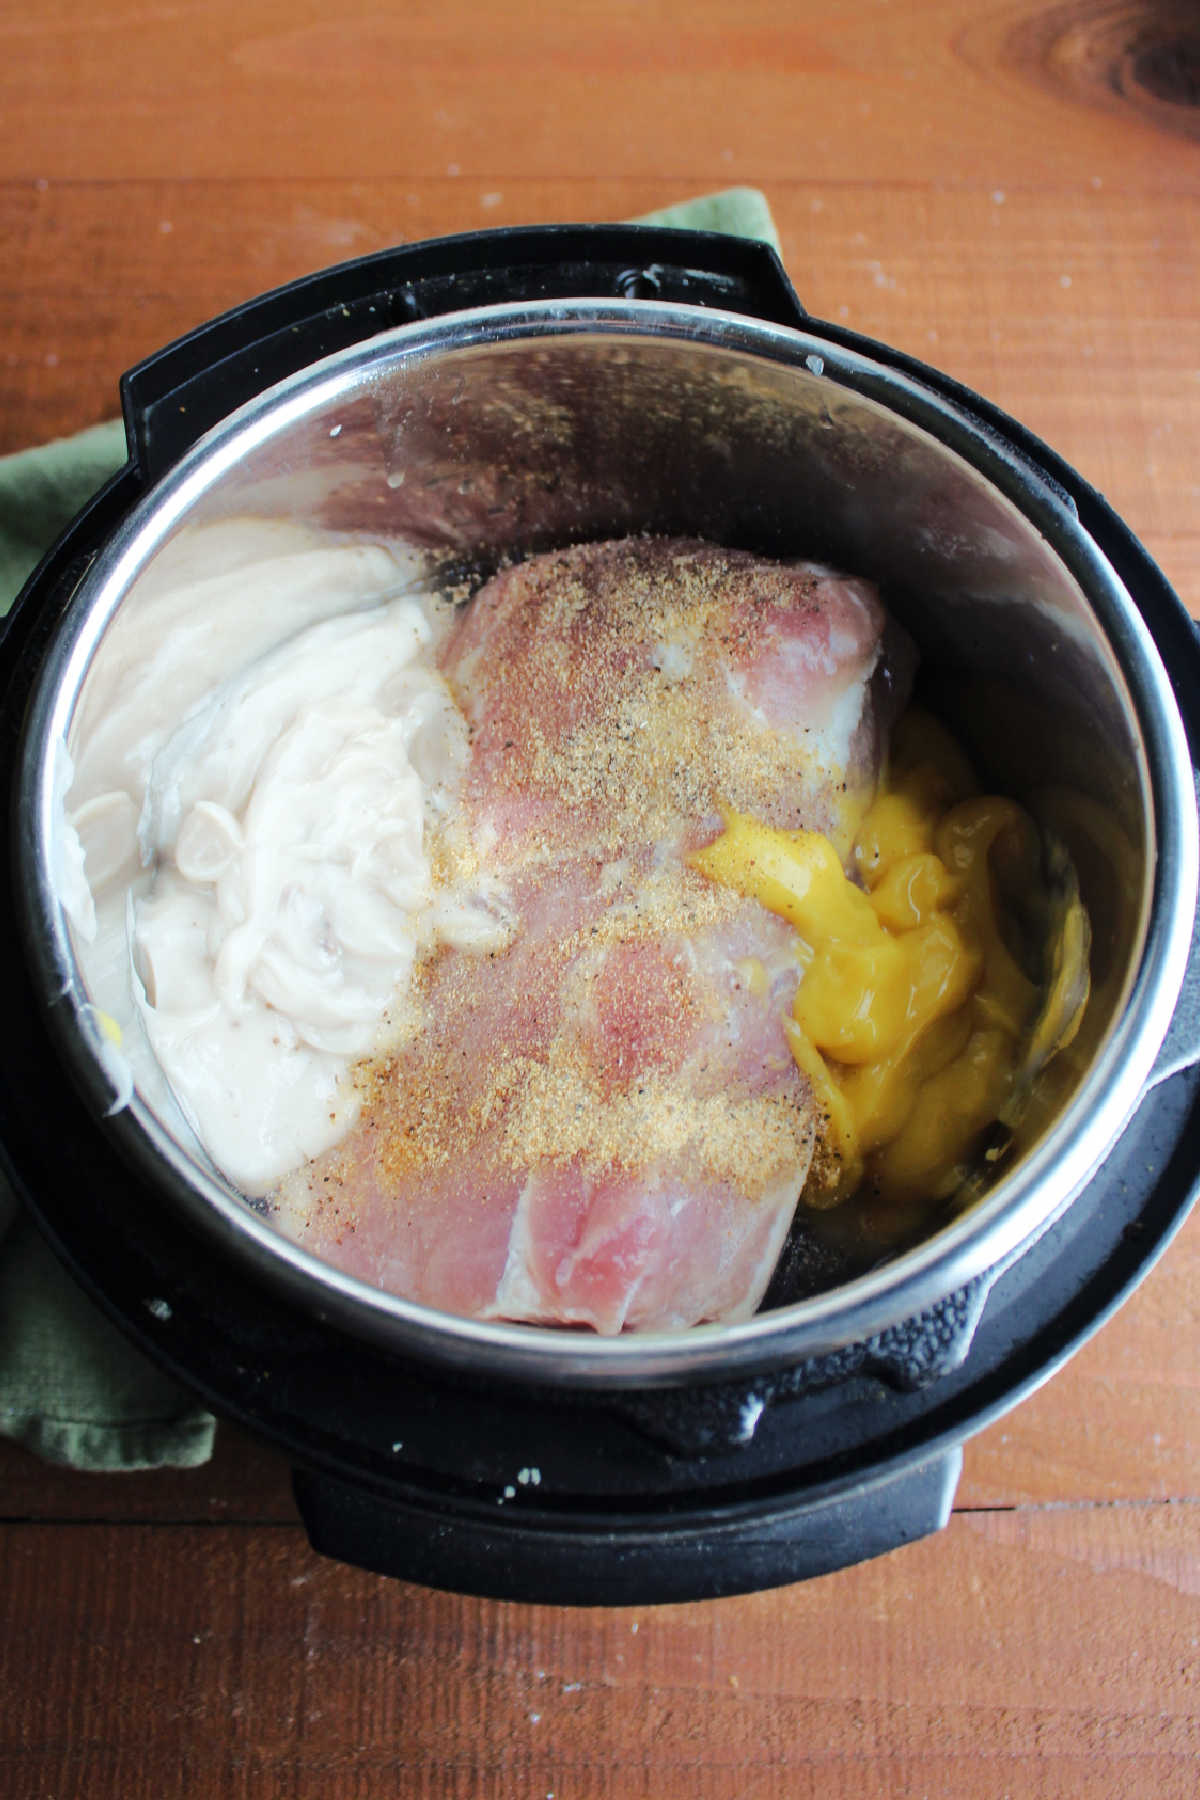 Pork loin, soups and seasoning in slow cooker.